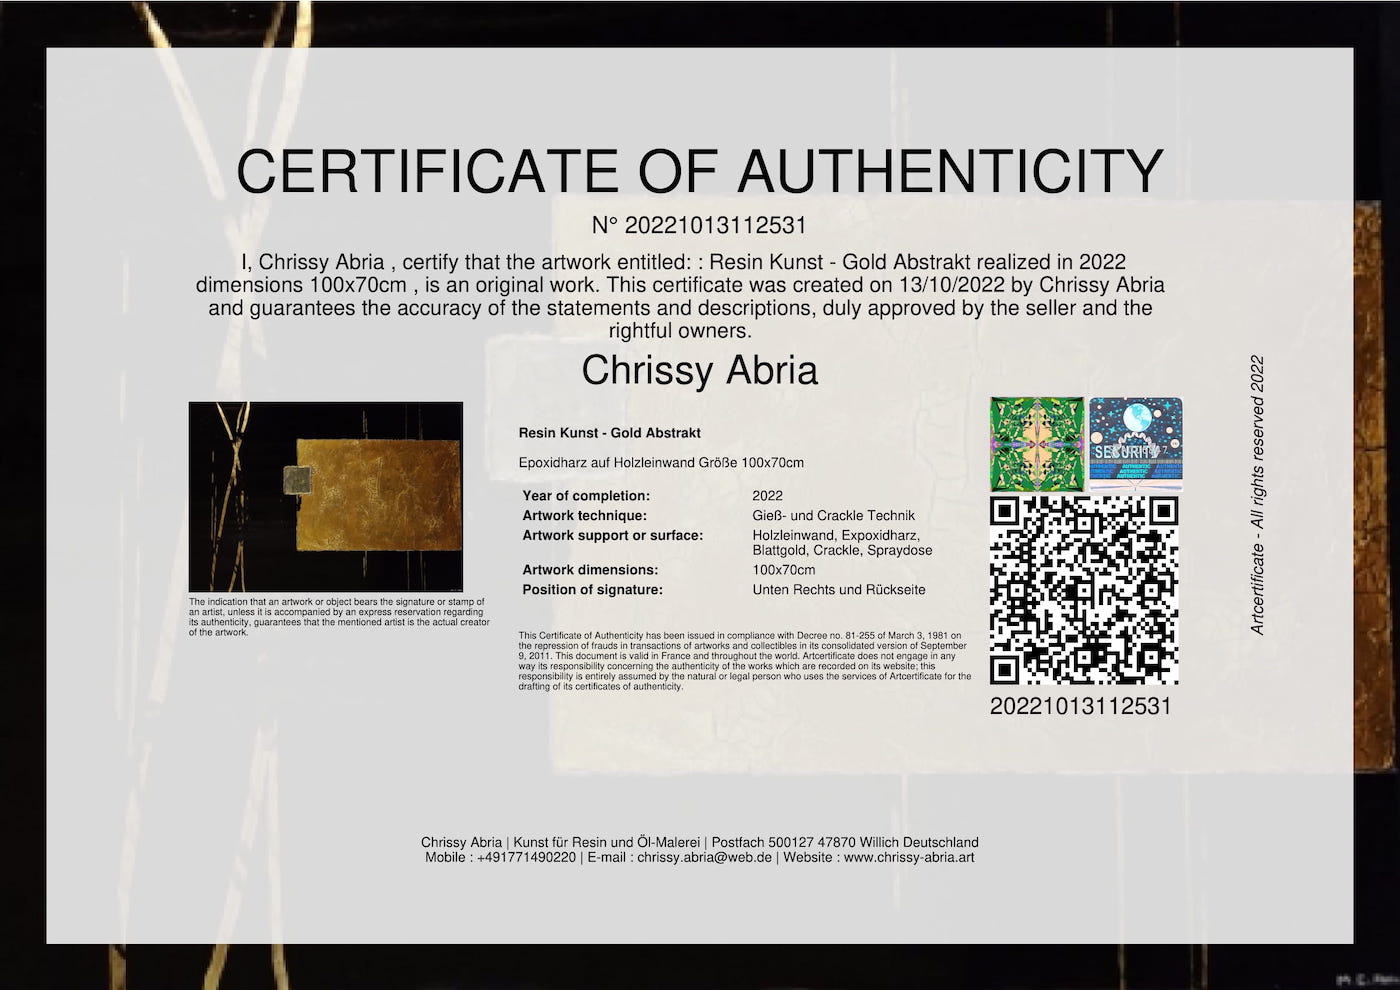 painting-by-chrissy-abria-certificat-20221013112531-1